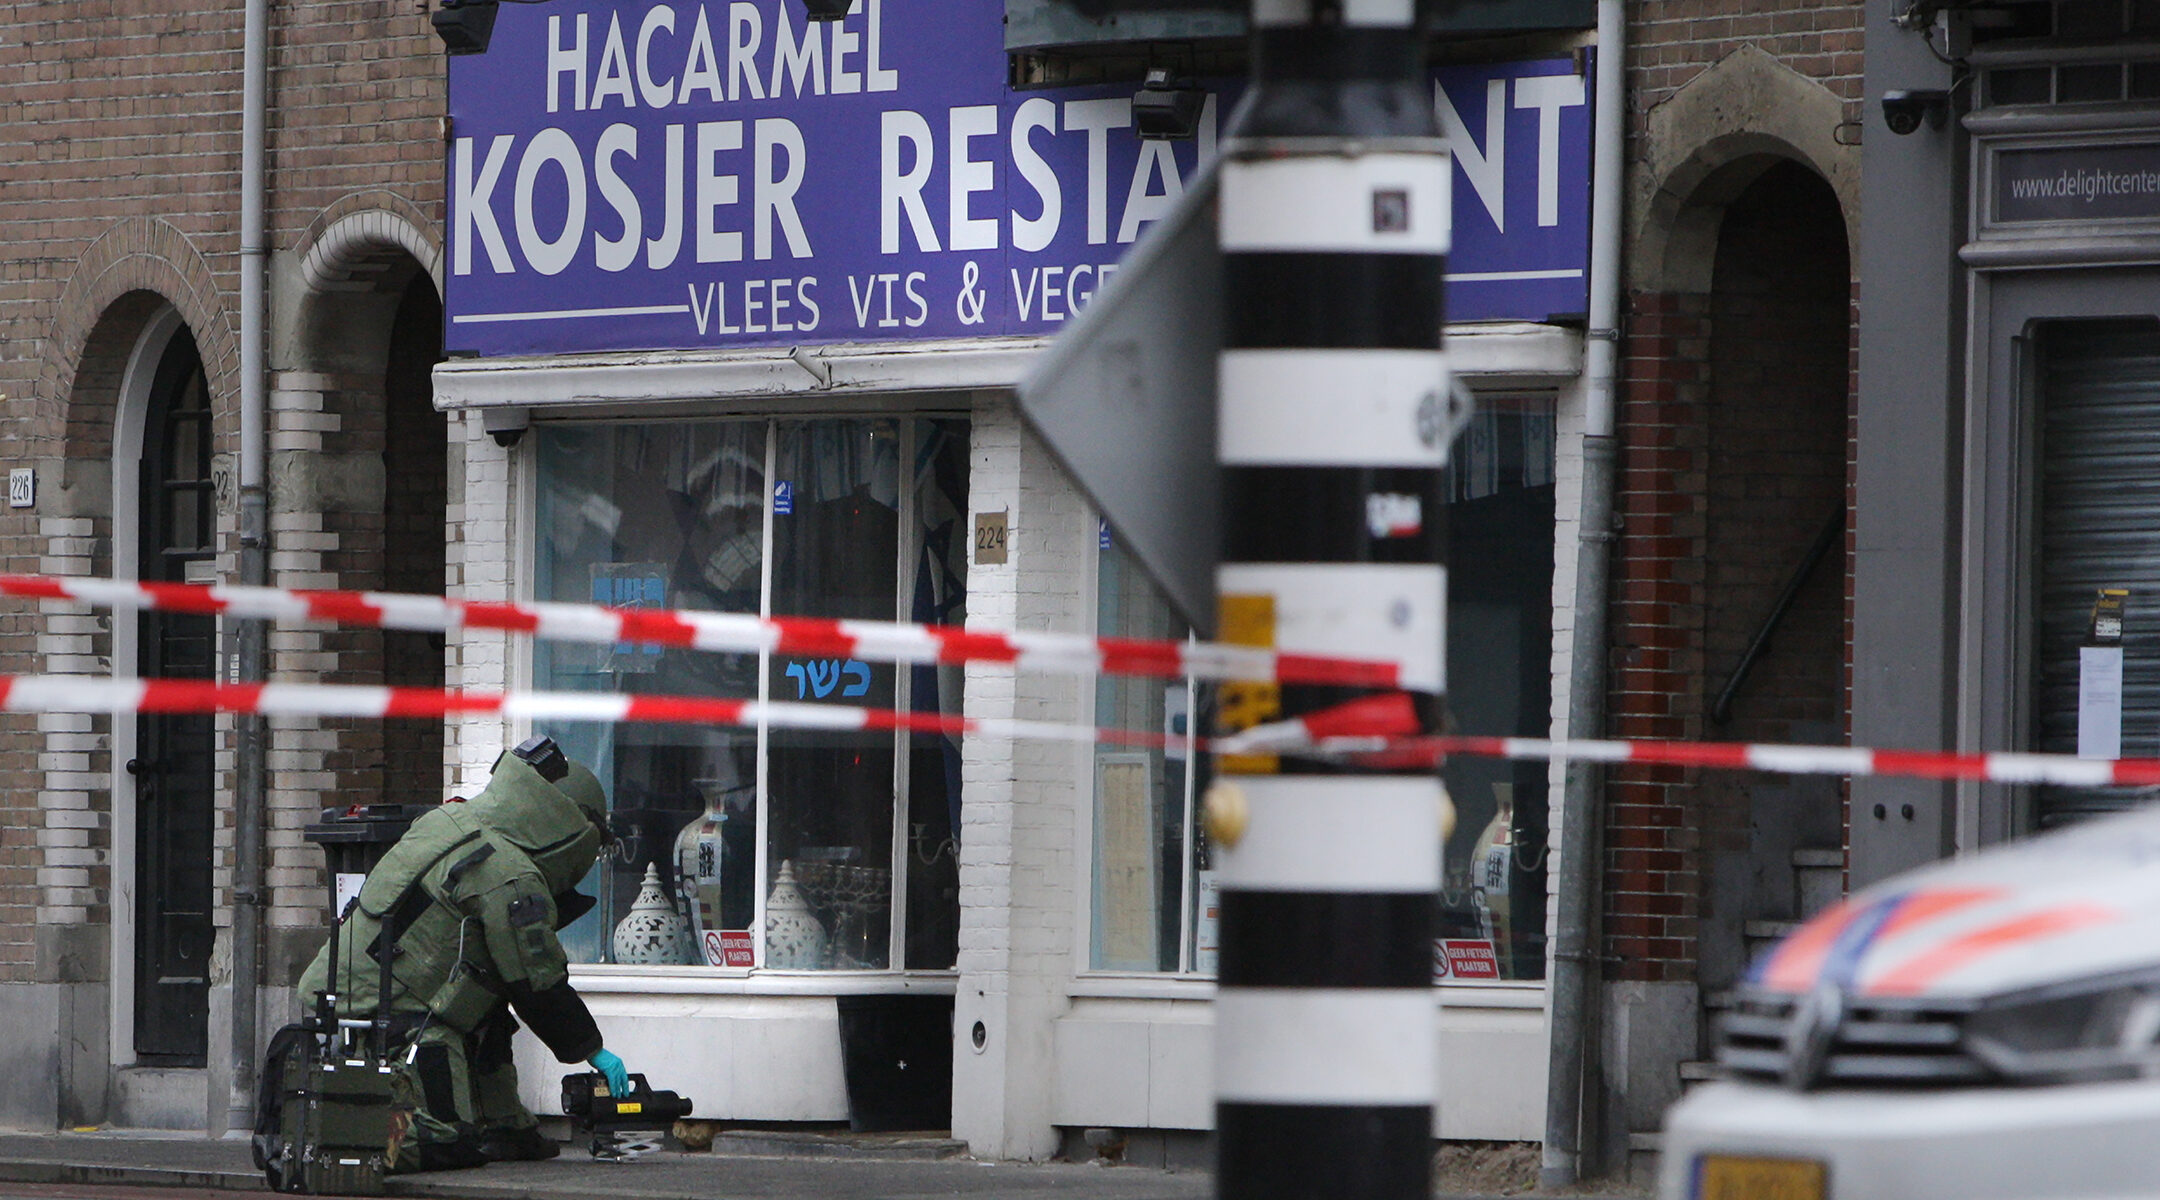 Police investigate a suspect package outside the kosher HaCarmel restaurant in Amsterdam, the Netherlands on January 15, 2020. (Paulo Amorim/NurPhoto via Getty Images)